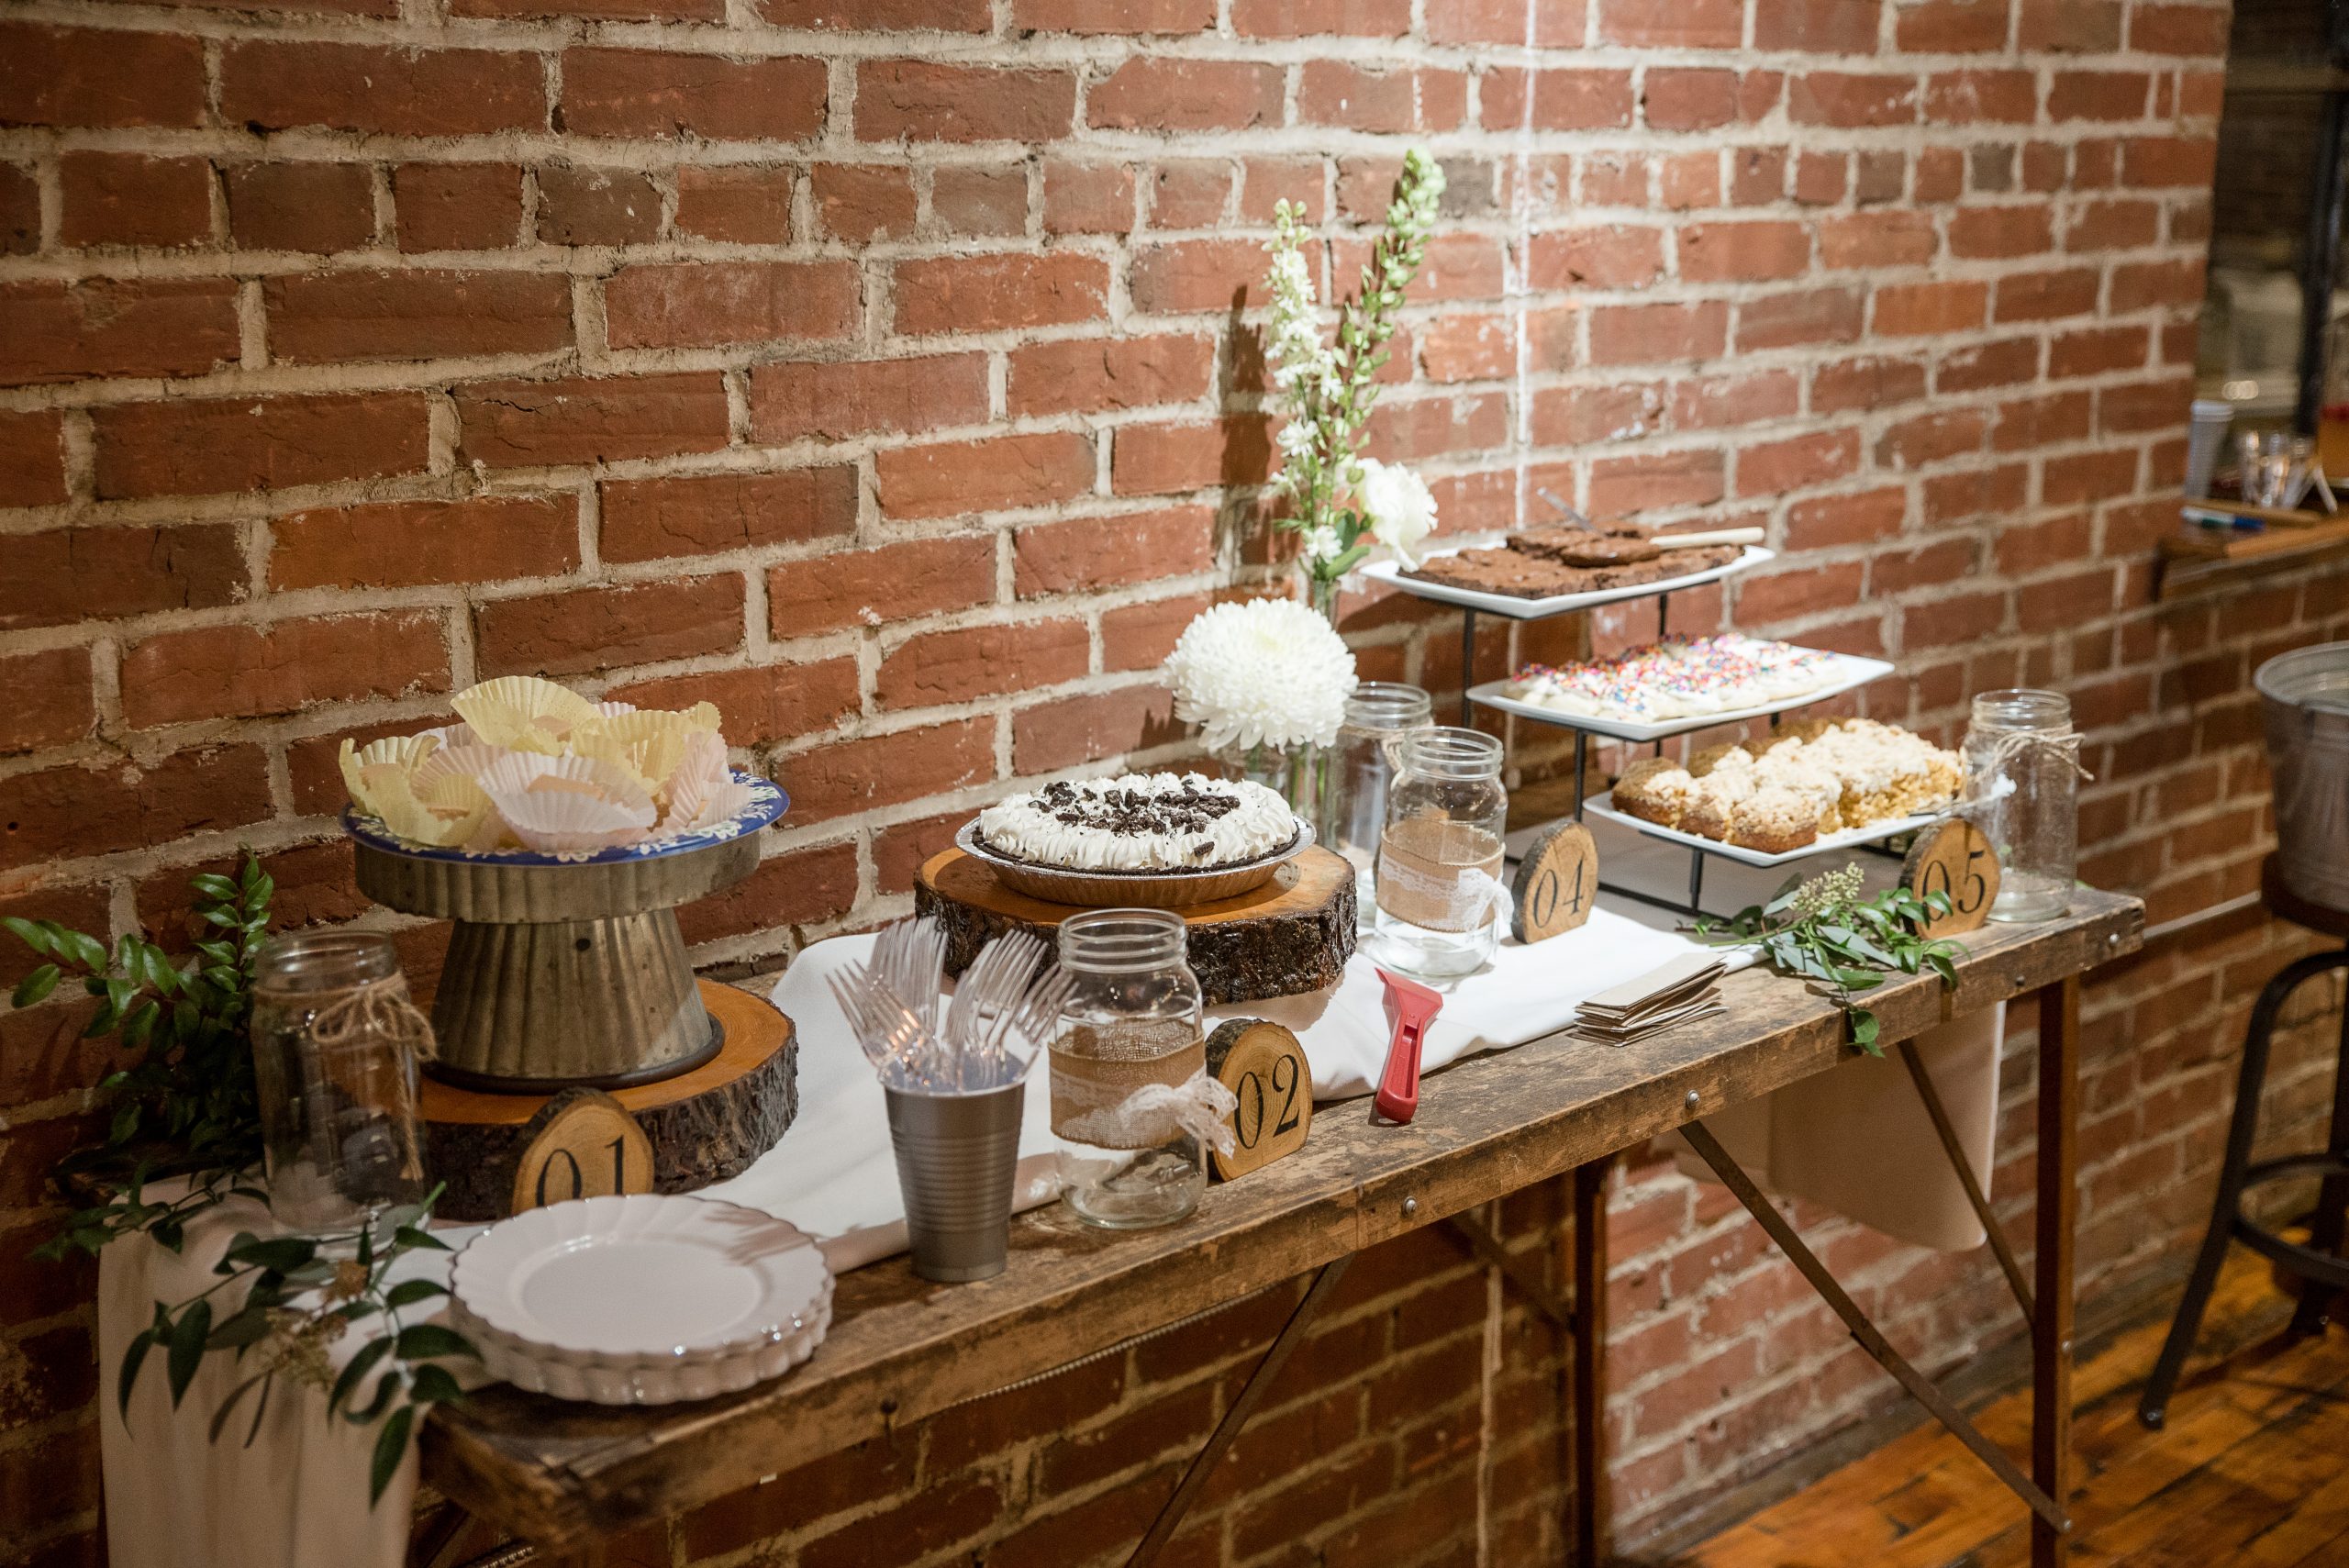 dessert table on old wallpaper table in front of brick wall